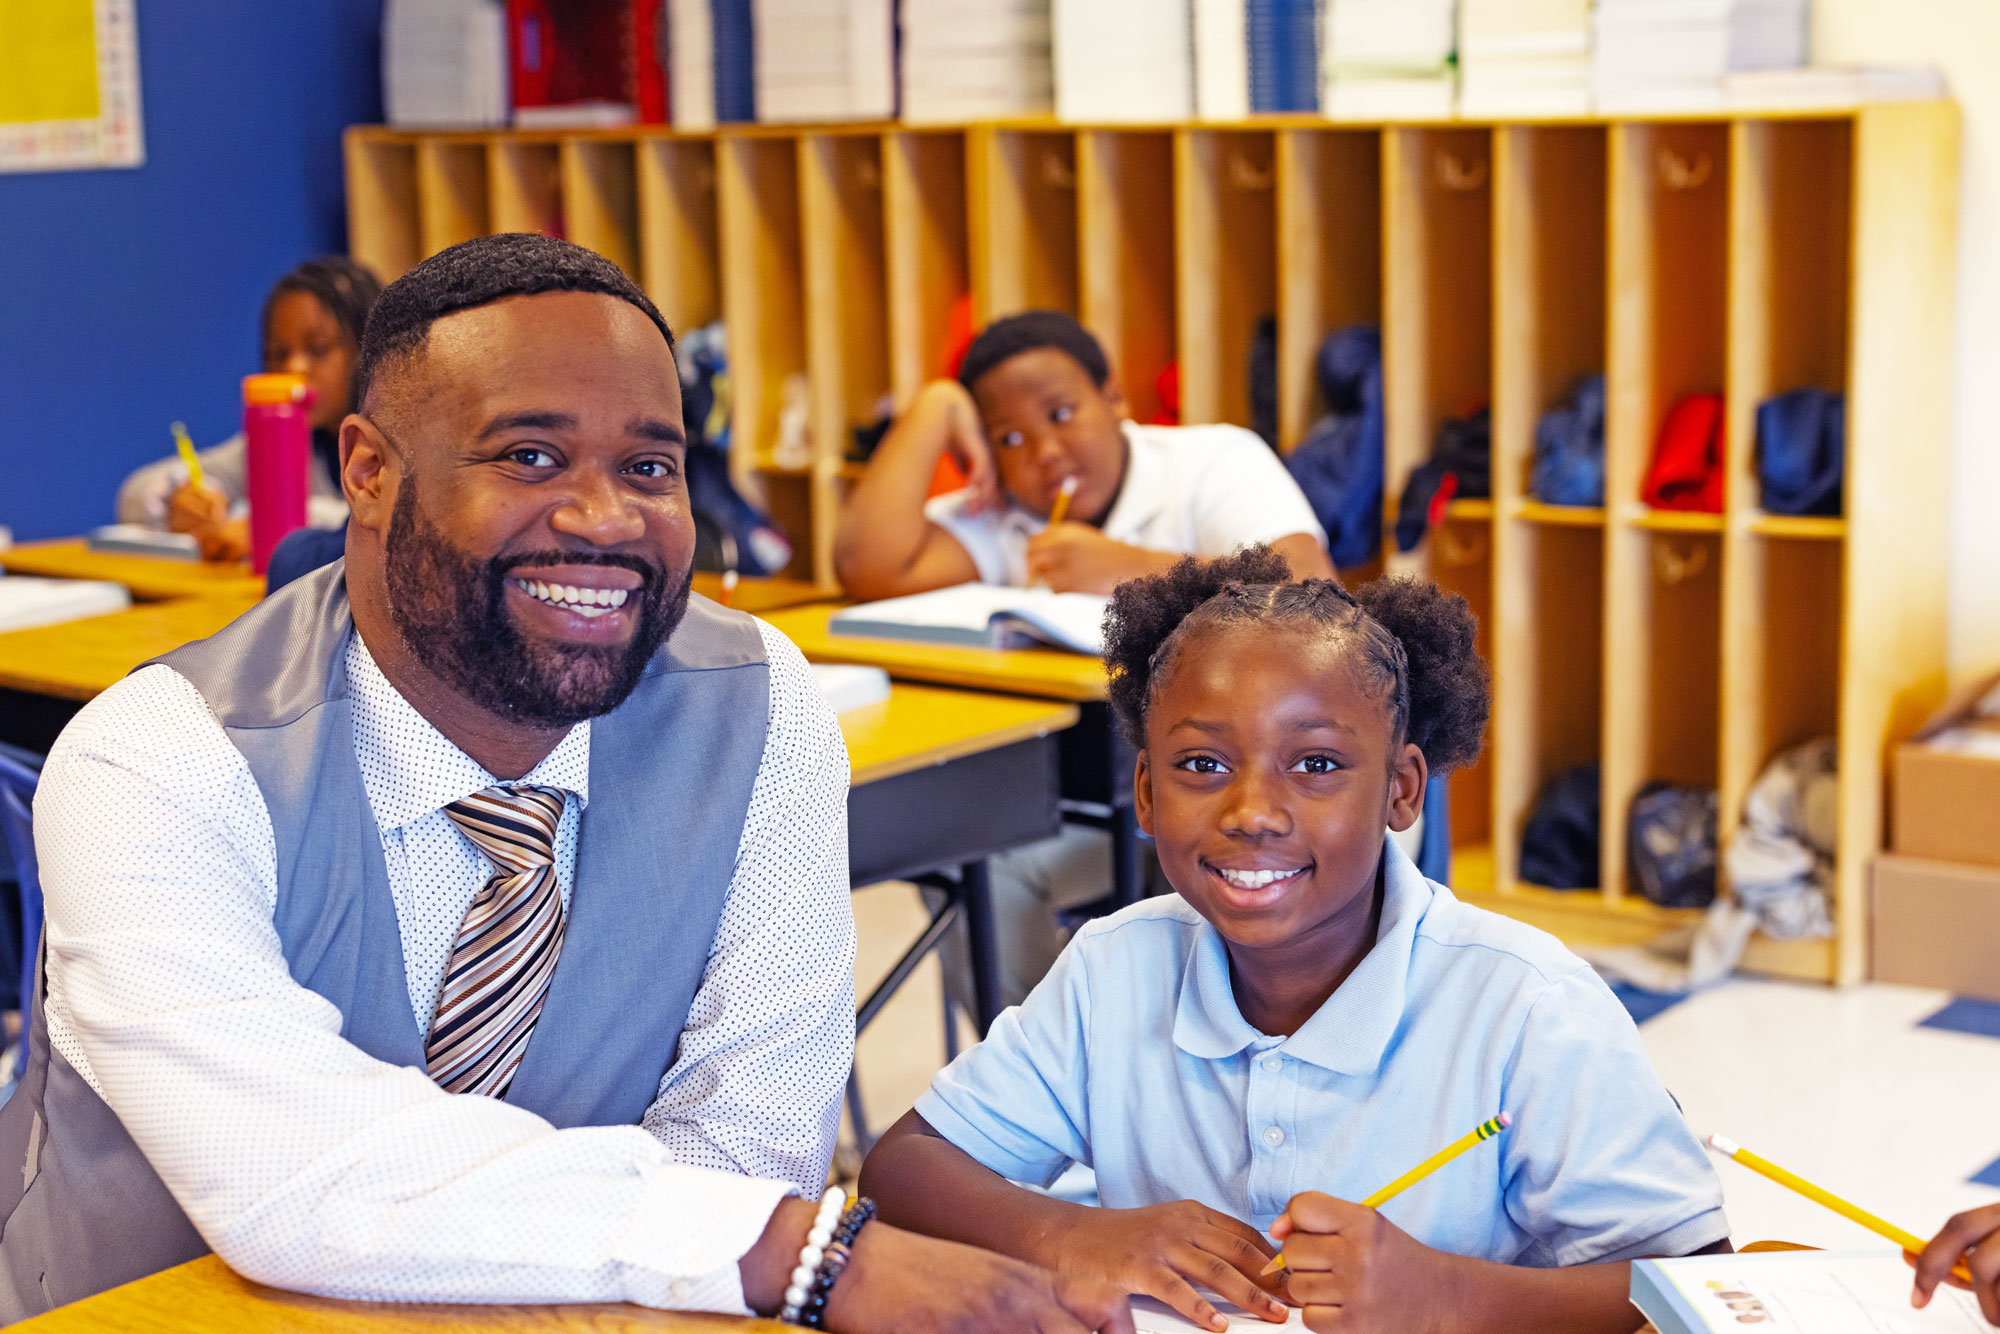 A teacher and student smiling in the classroom